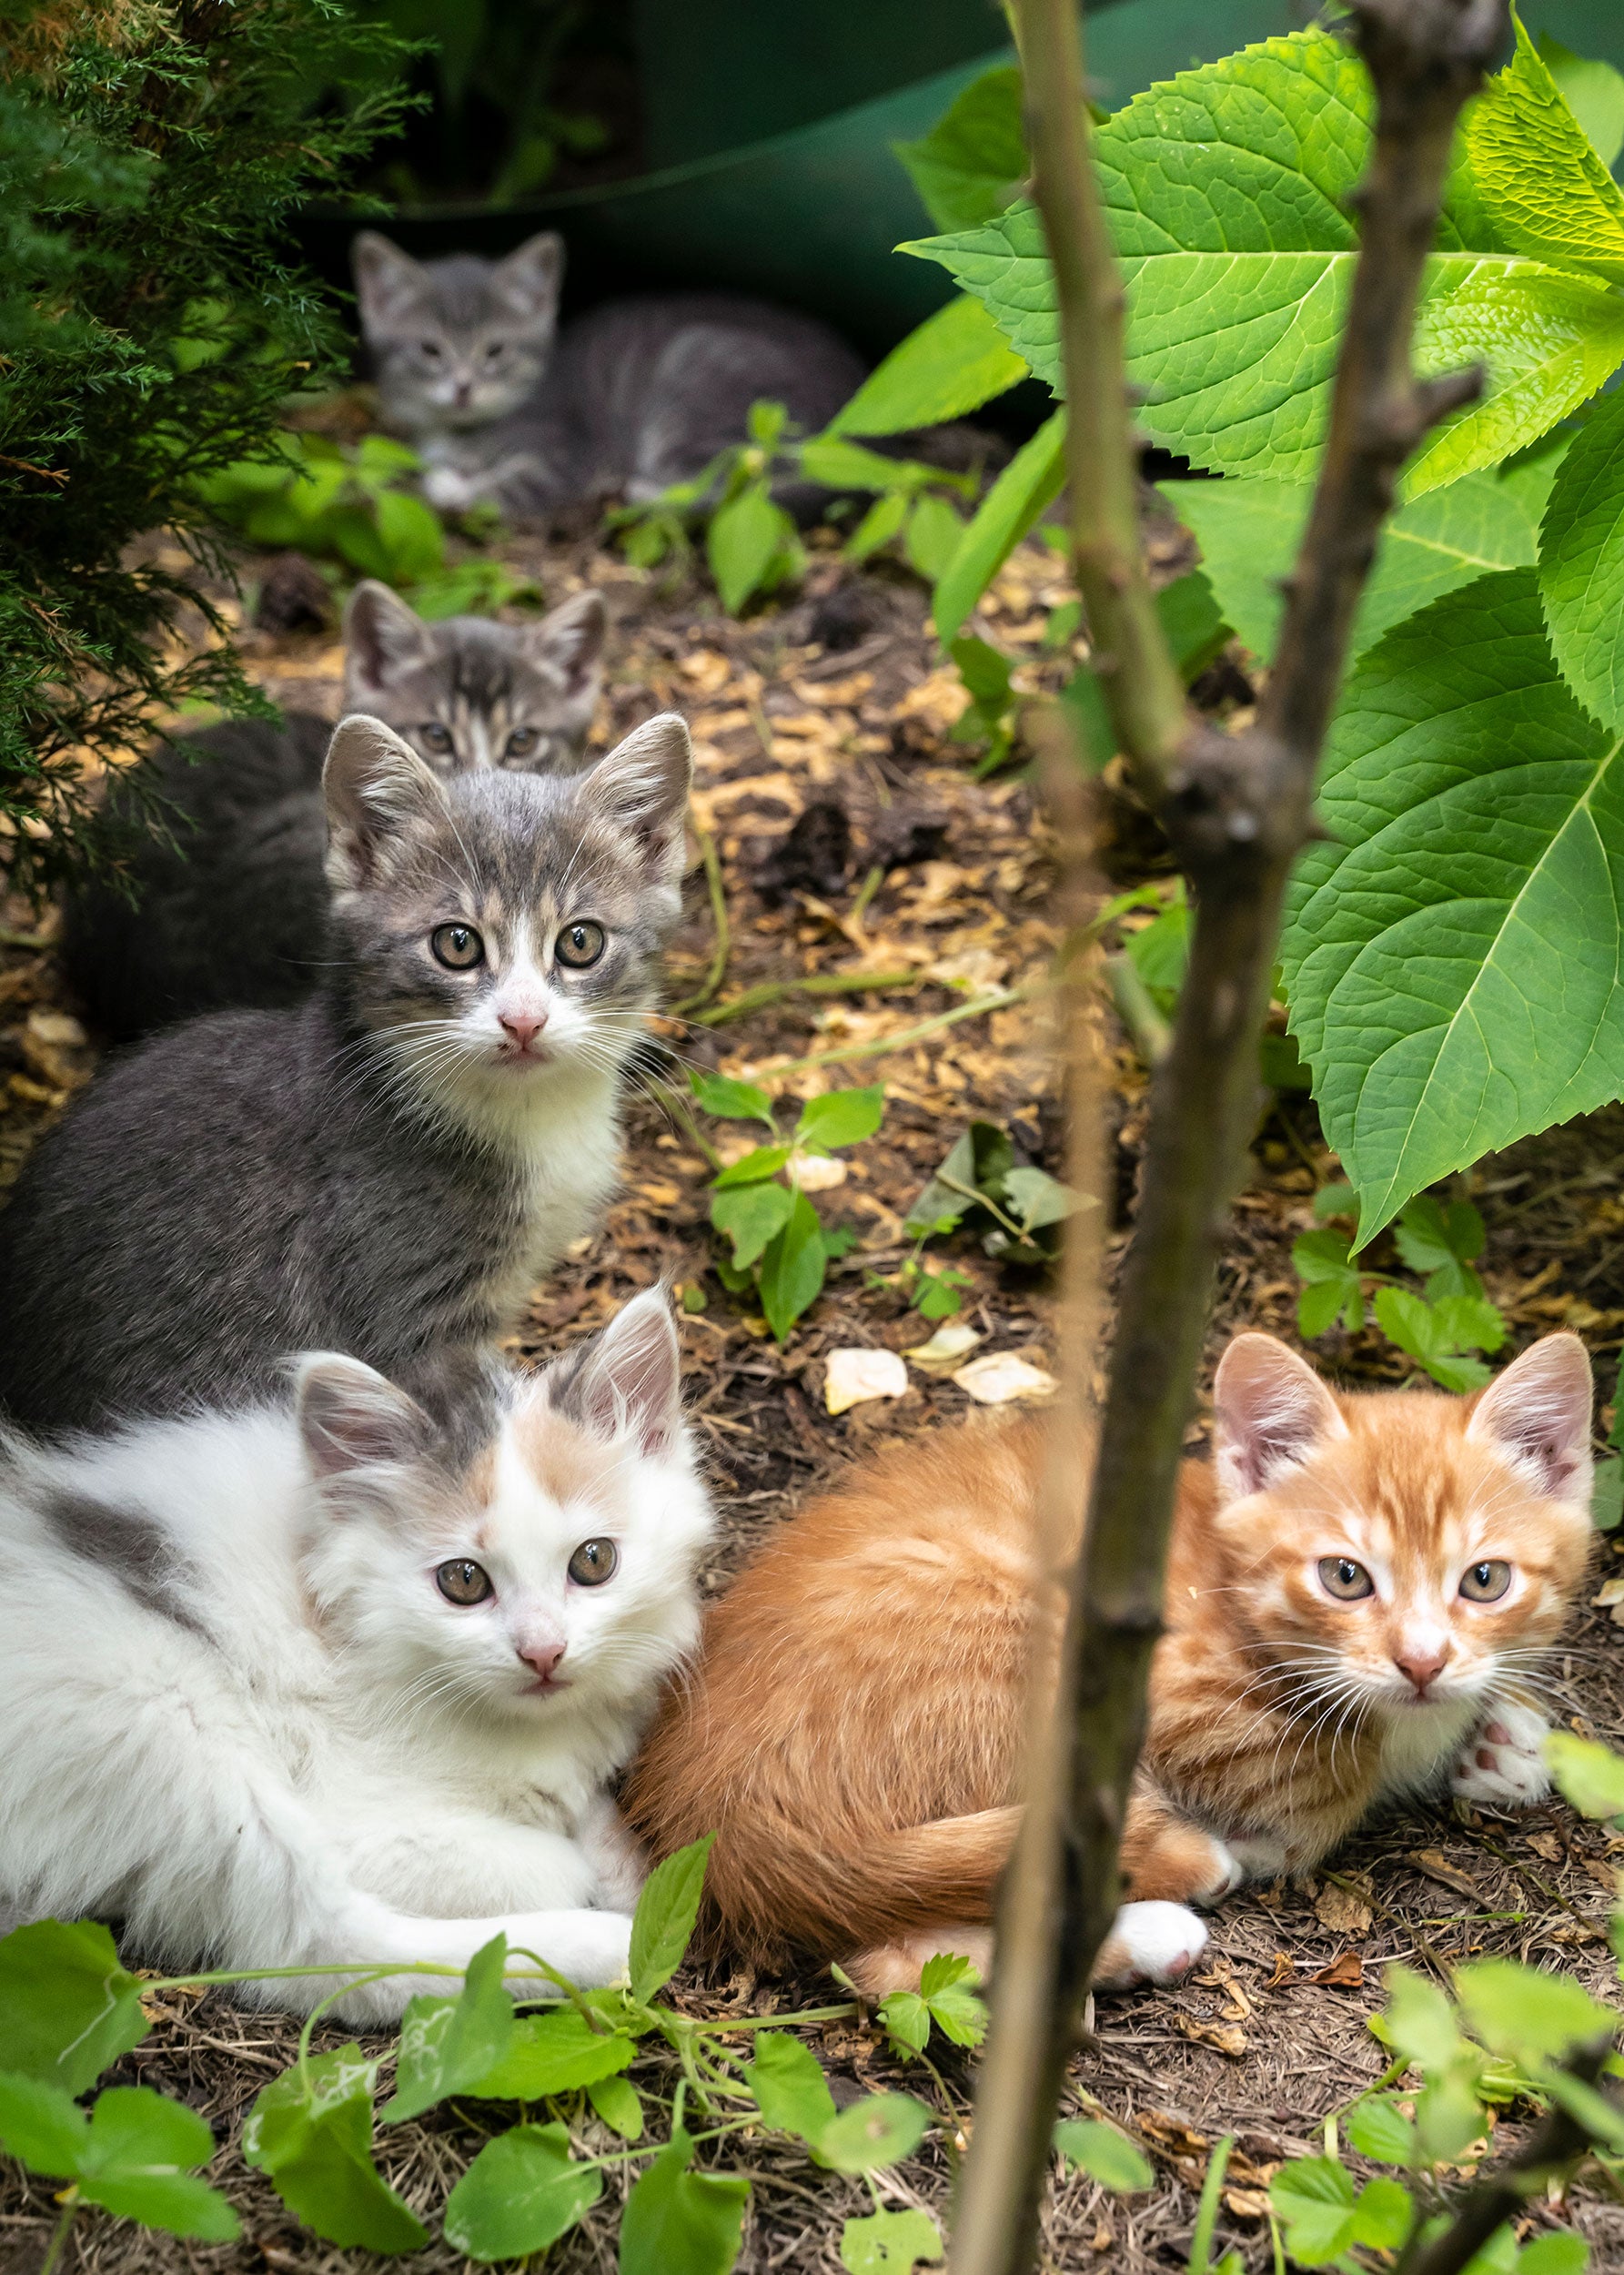 Kittens in the wild.